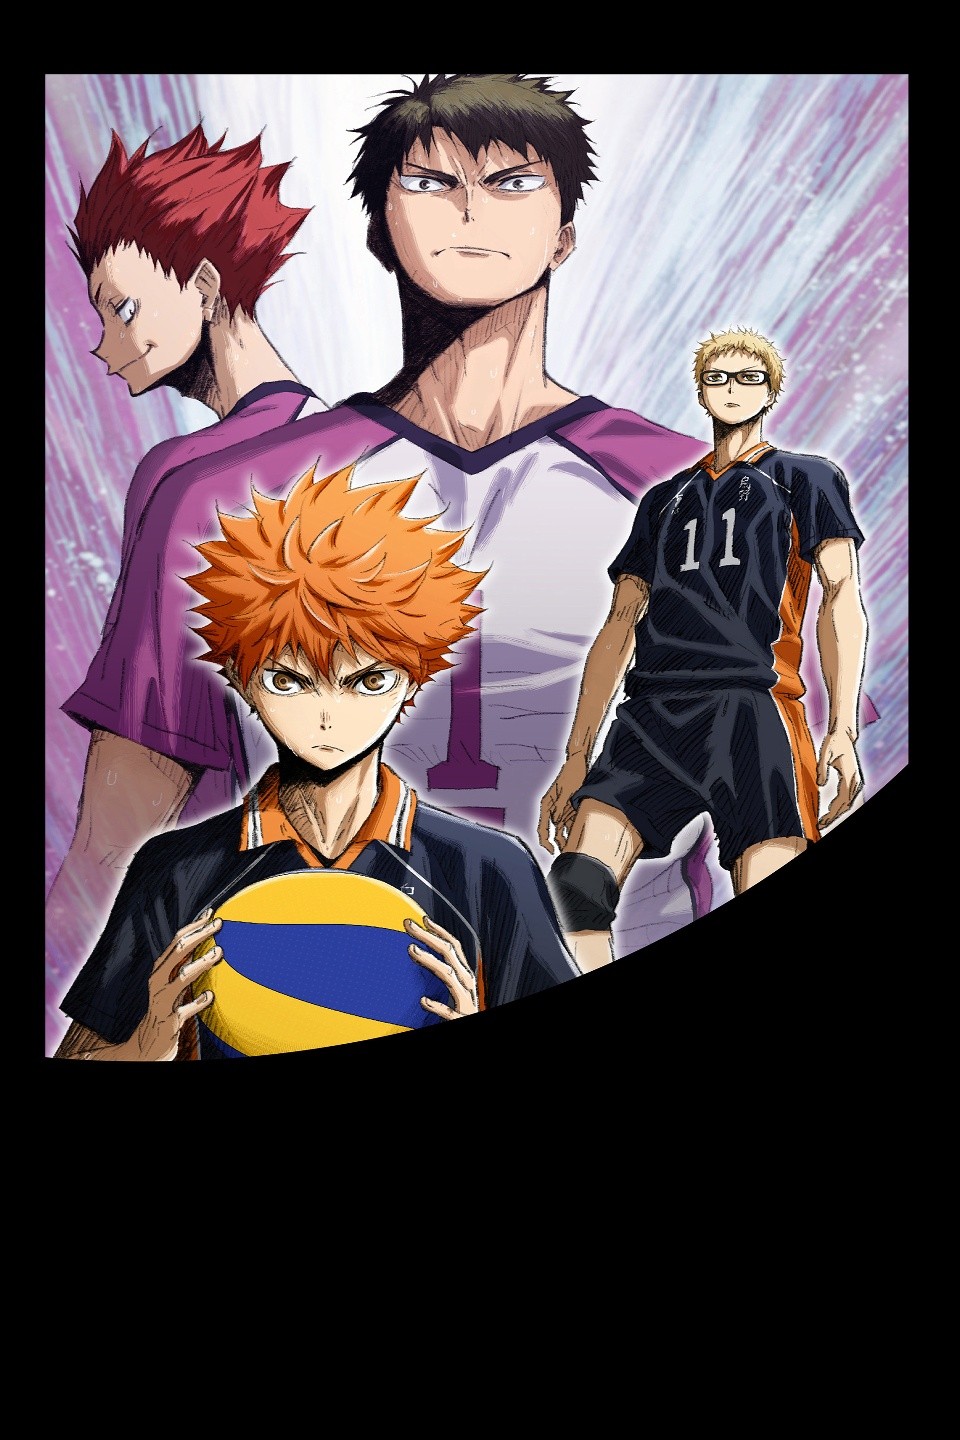 Haikyu! The Movie: Battle of Concepts - Rotten Tomatoes